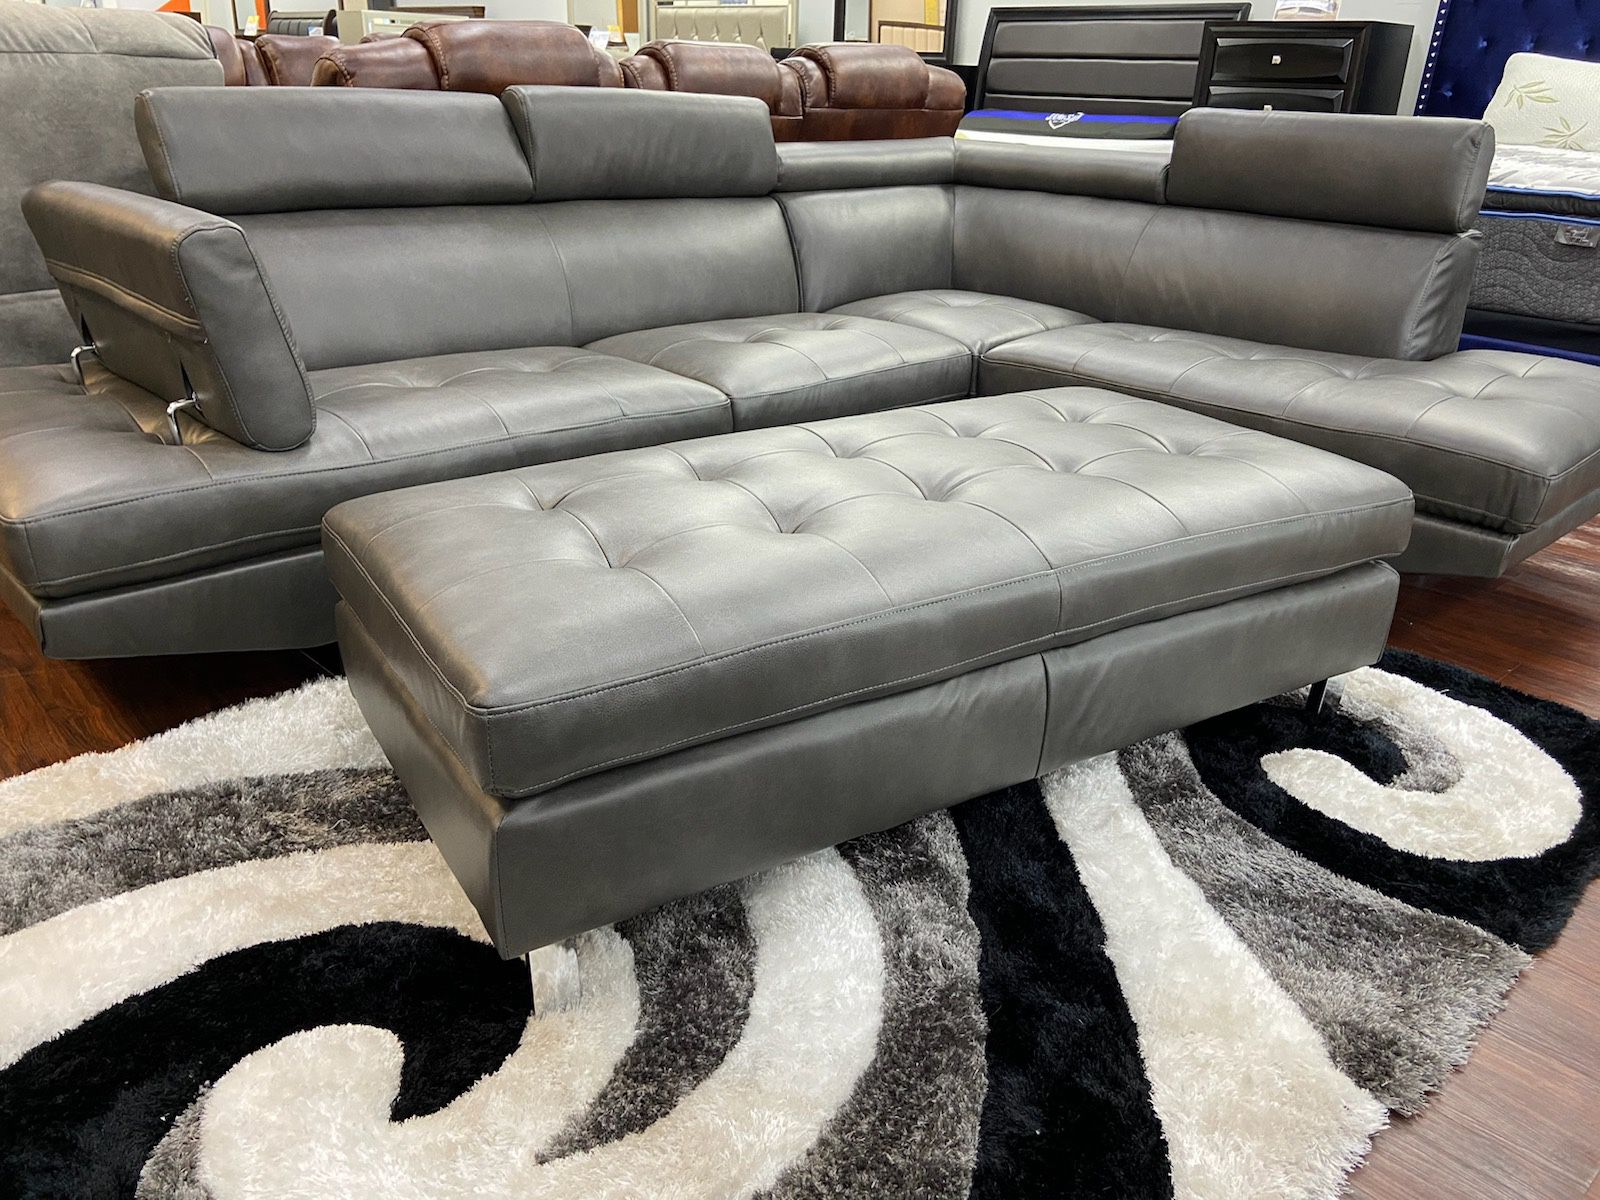 BEAUTIFUL GREY IBIZA SMALL SECTIONAL SOFA!$899!*SAME DAY DELIVERY*EASY FINANCING*NO CREDIT NEEDED*HUGE SALE*